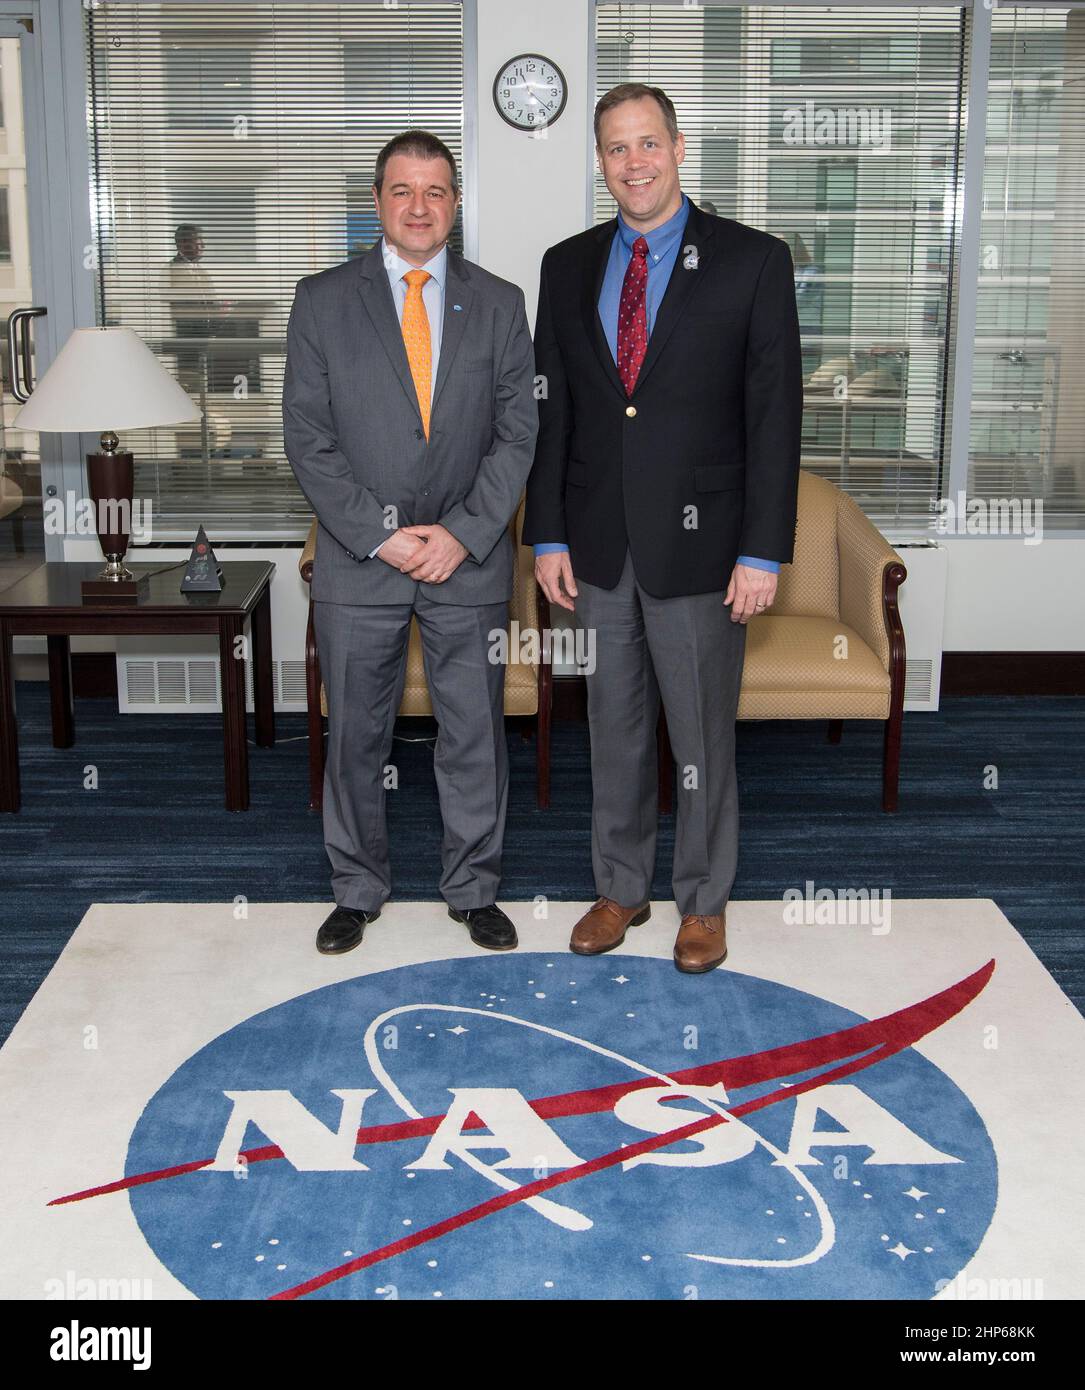 NASA Administrator Jim Bridenstine, right, poses for a photo with Mr. Raúl Kulichevsky, the Executive and Technical Director of the Argentine Space Agency (CONAE), Friday, March 29, 2019 at NASA Headquarters in Washington. Stock Photo